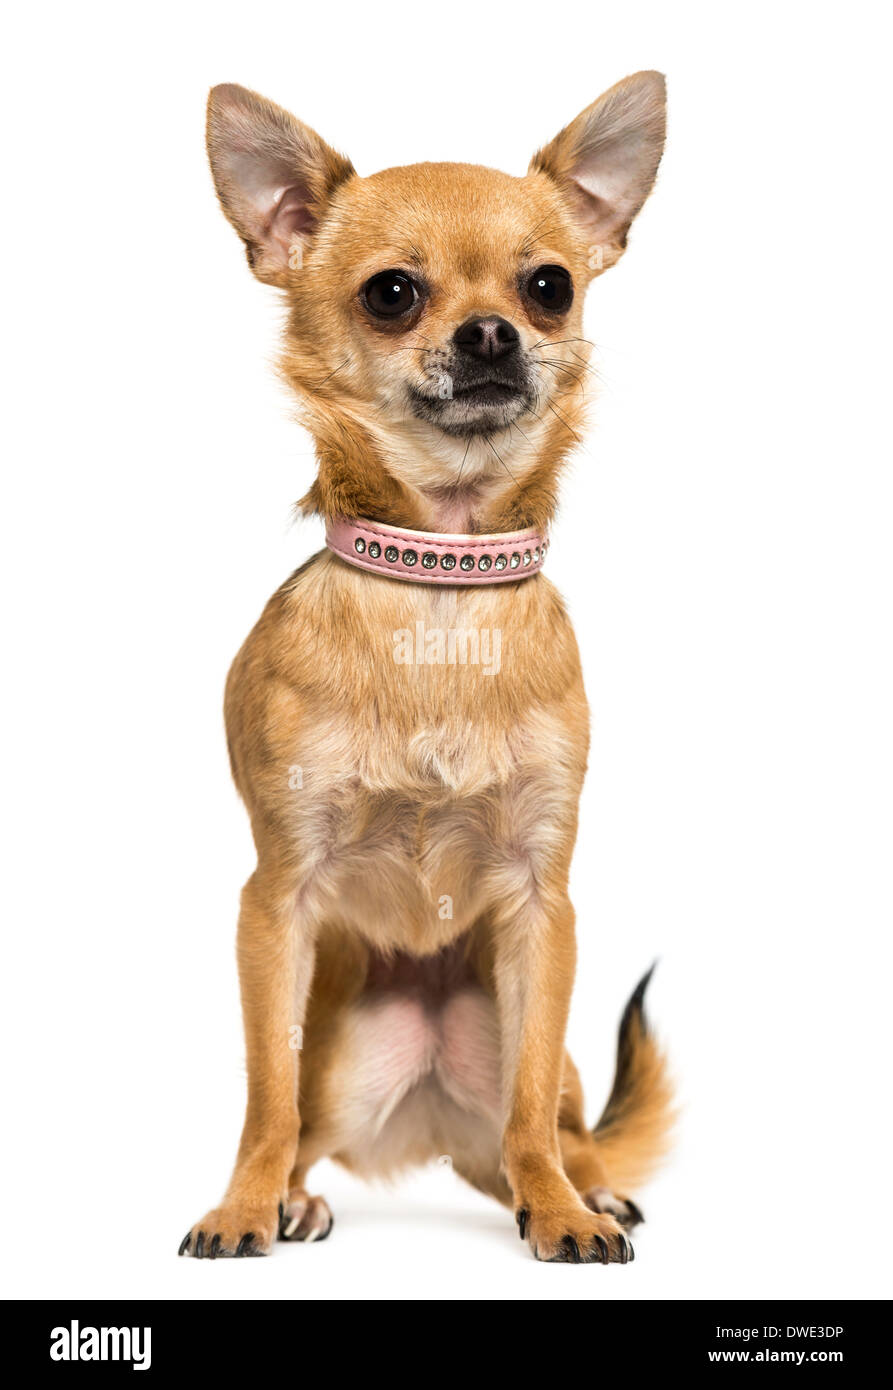 Front view of a Chihuahua wearing a pink collar, sitting, 2,5 years old, against white background Stock Photo